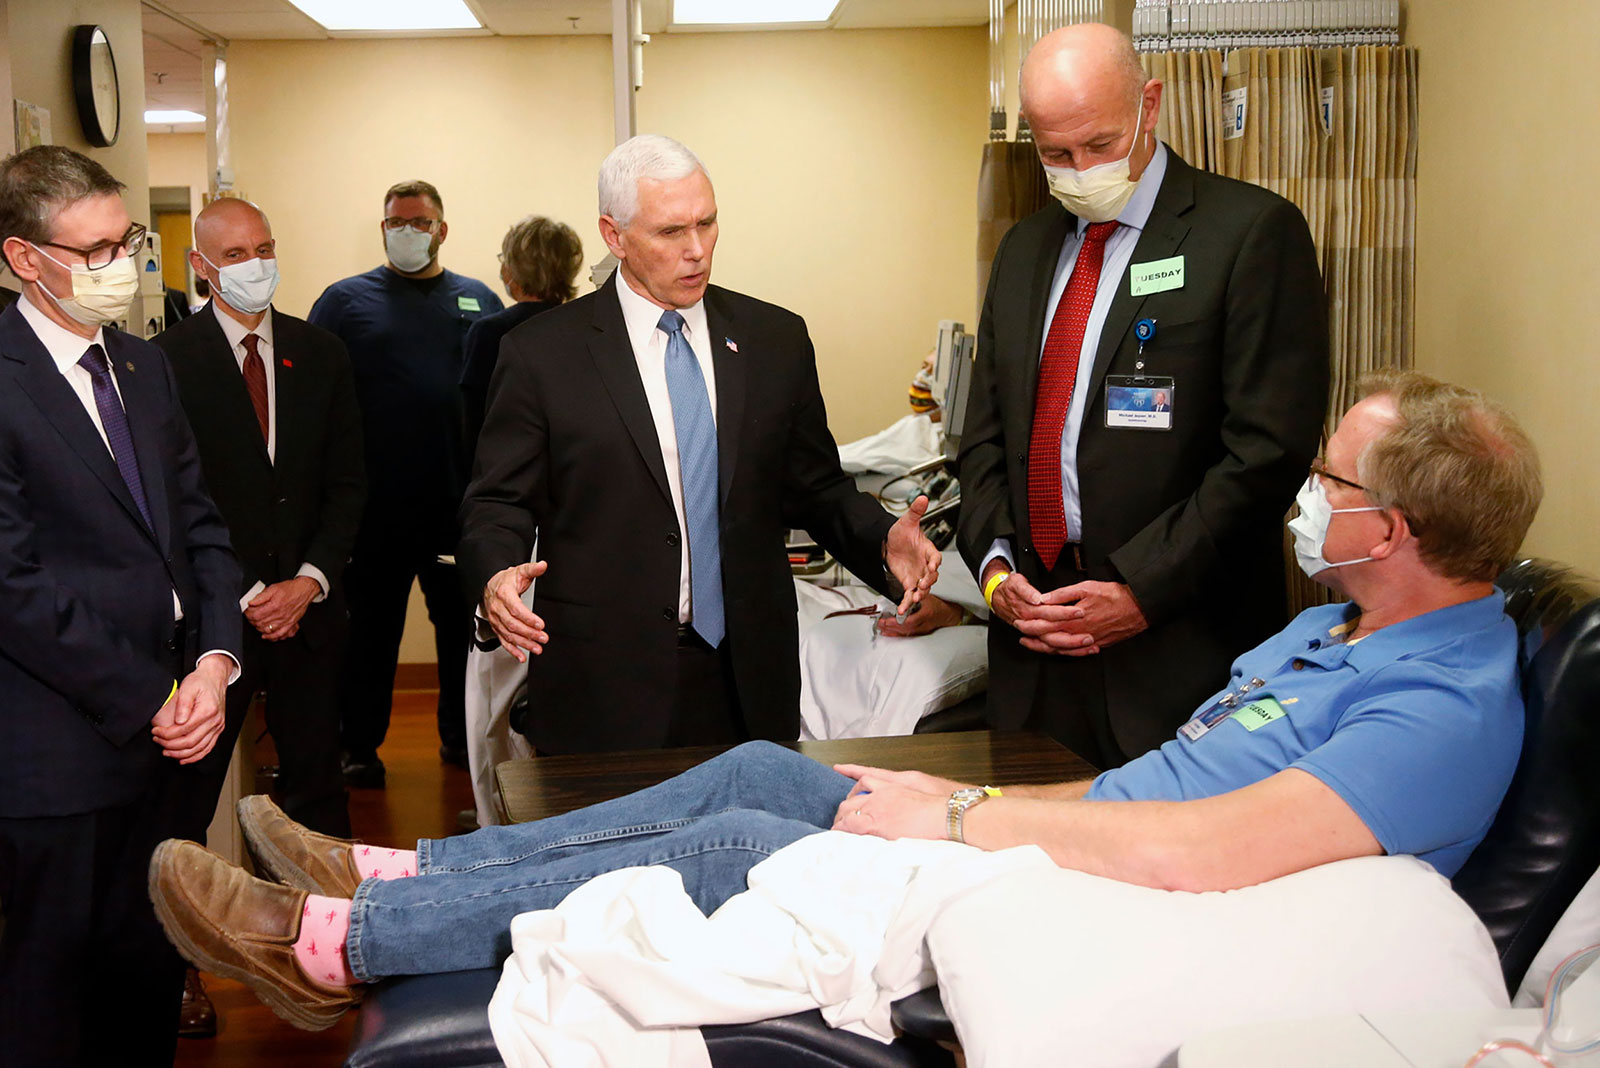 US Vice President Mike Pence chose not to wear a mask during his visit to the Mayo Clinic on Tuesday, April 28.